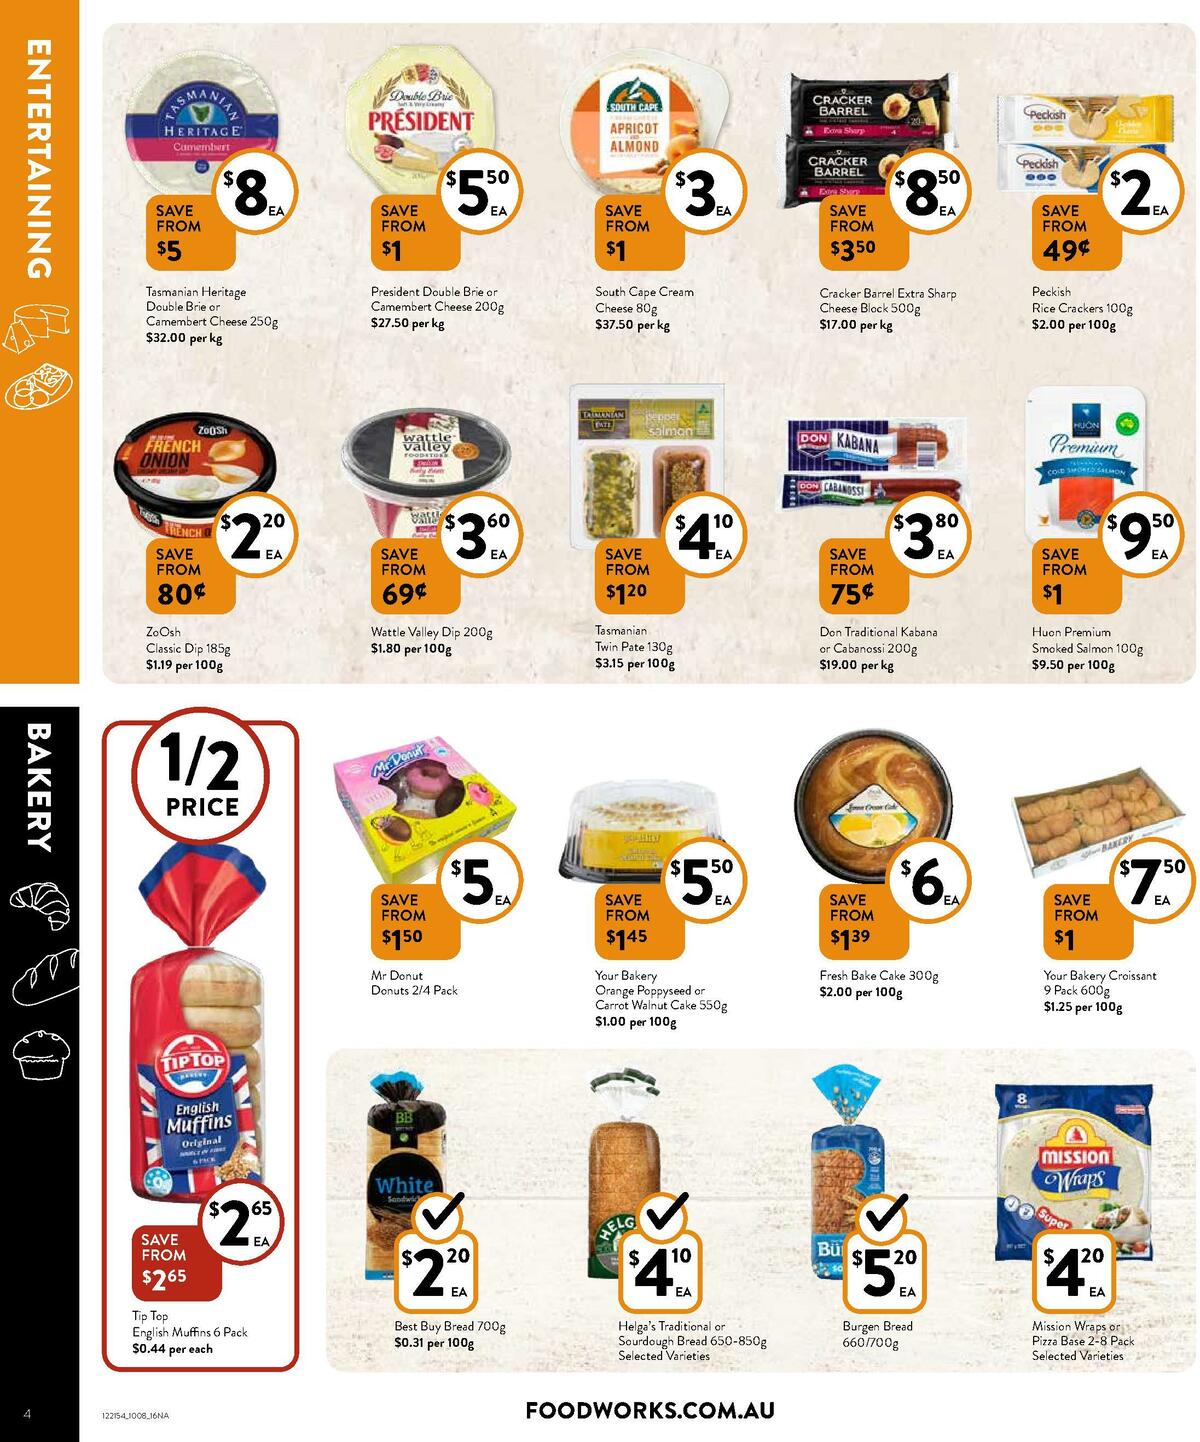 FoodWorks Supermarket Catalogues from 10 August